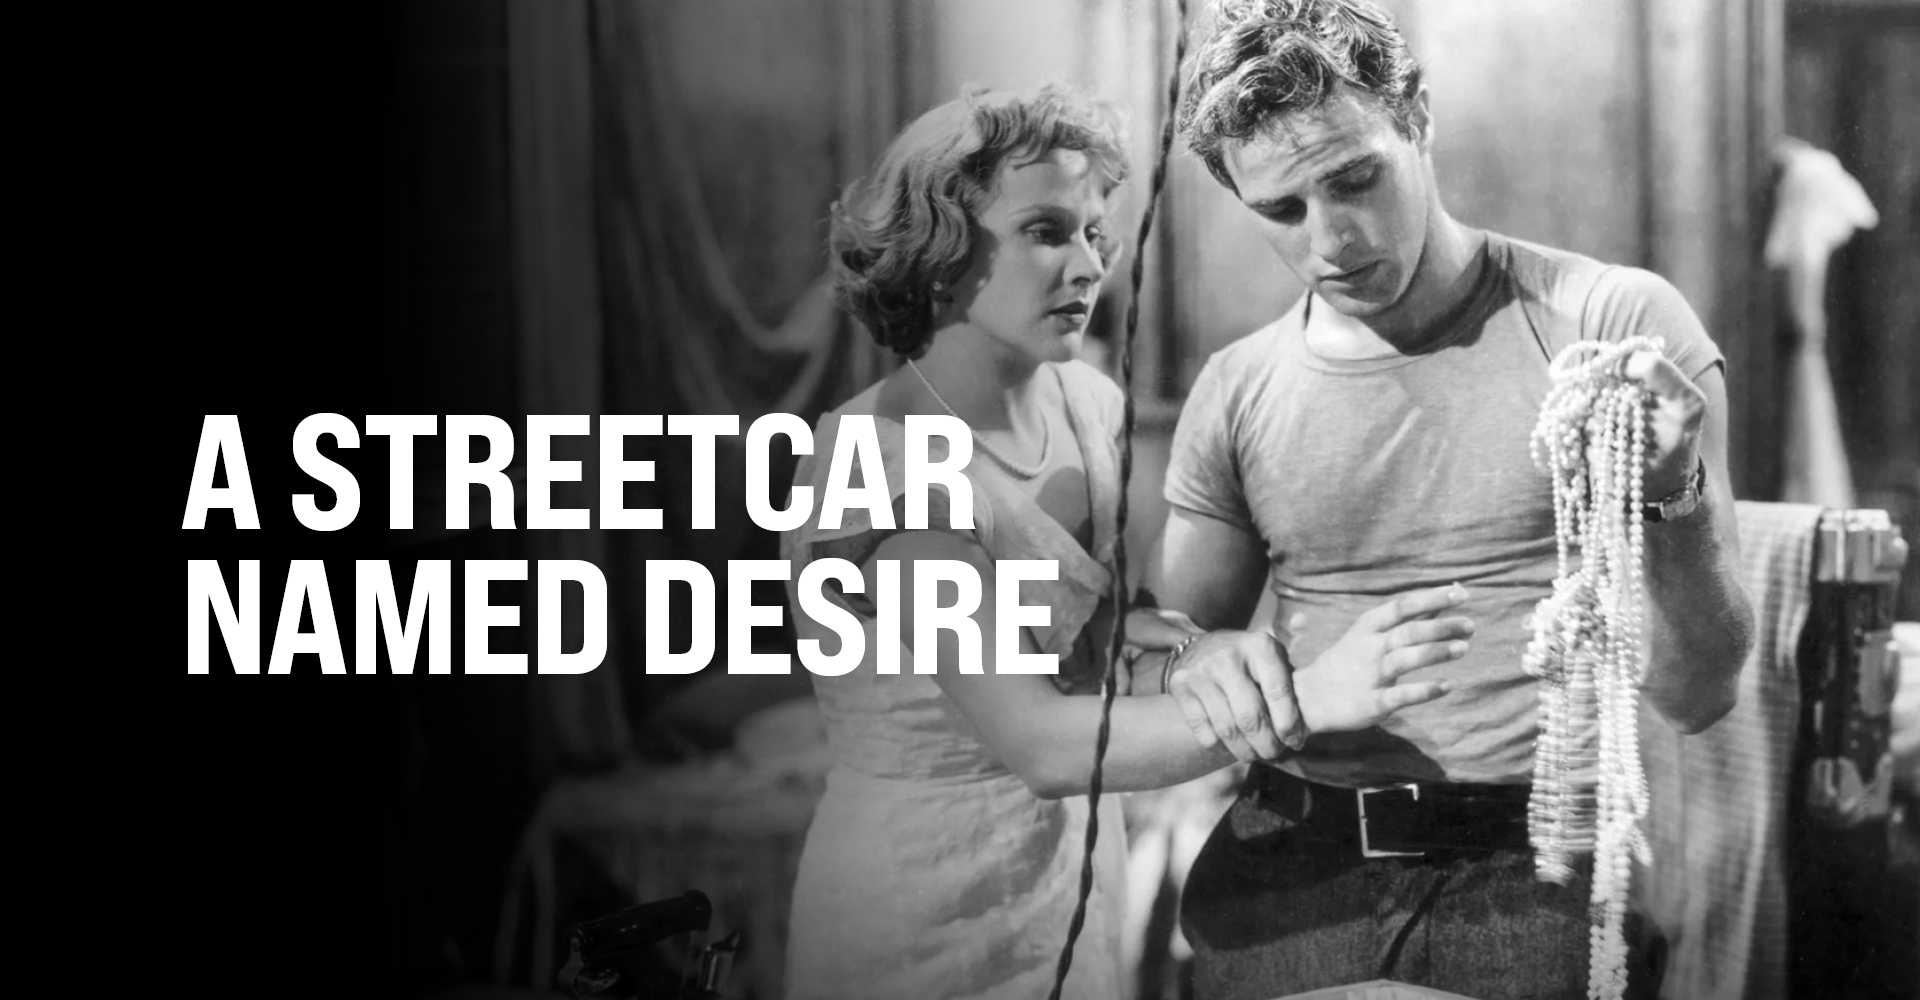 39-facts-about-the-movie-a-streetcar-named-desire